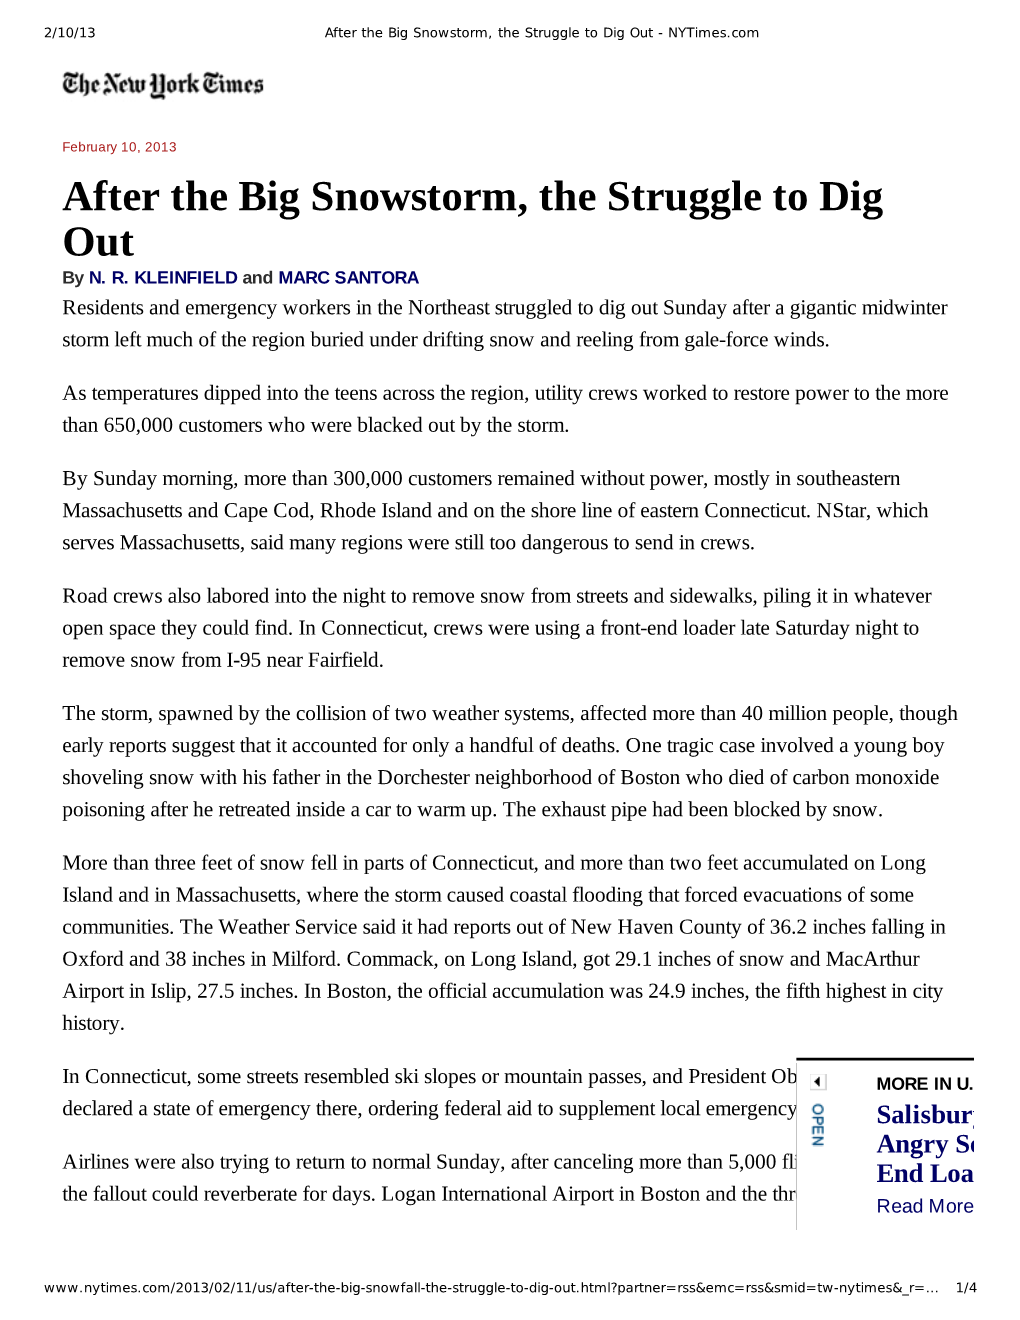 After the Big Snowstorm, the Struggle to Dig out - Nytimes.Com